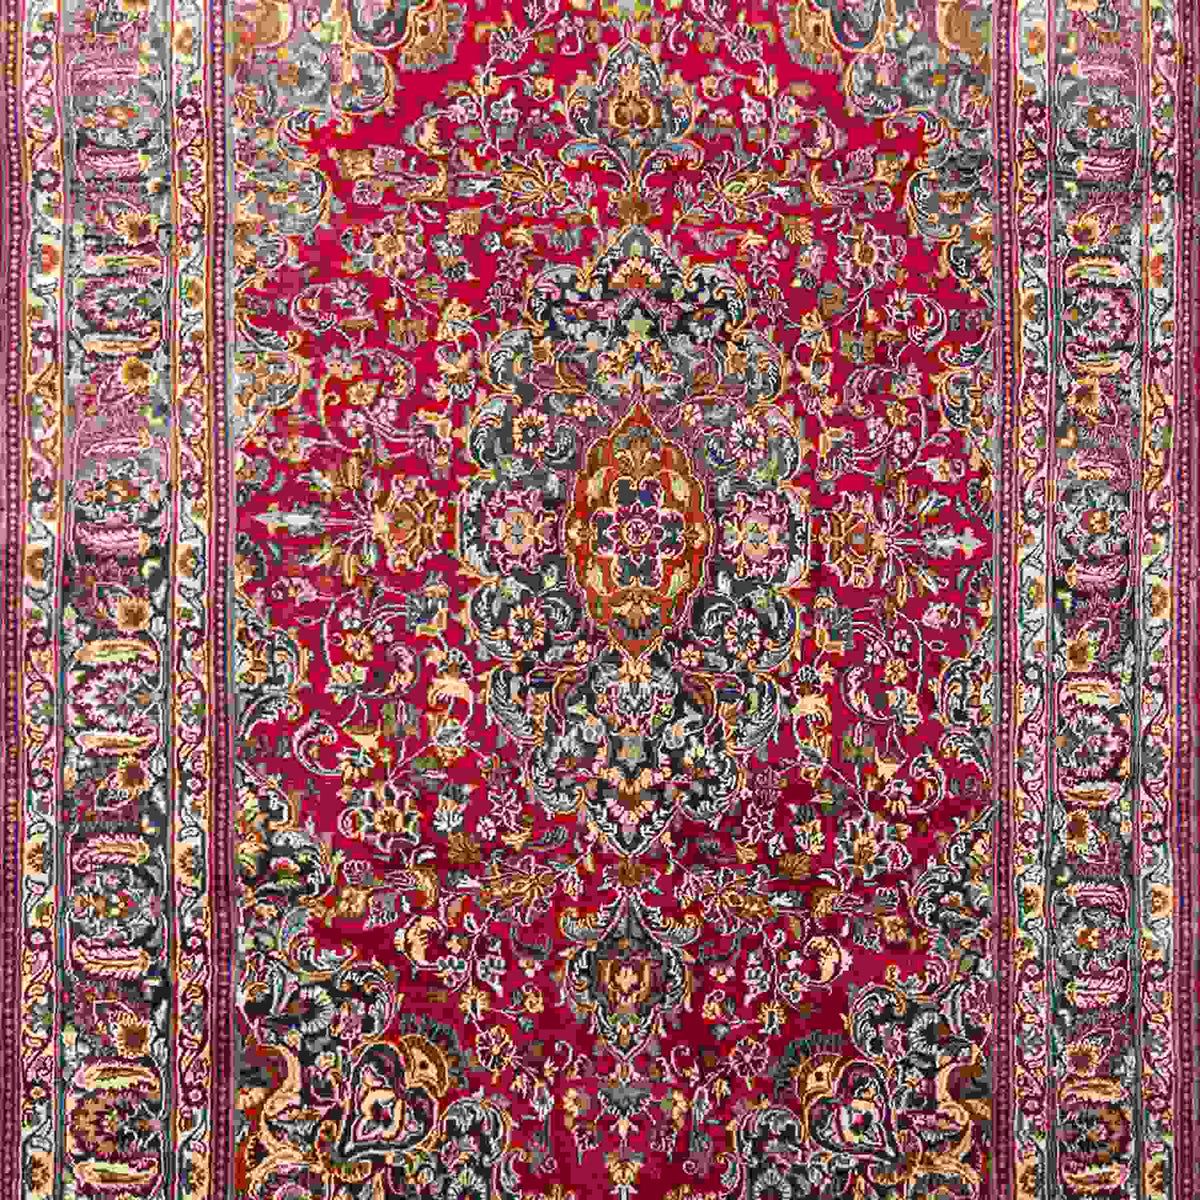 Fine Hand-knotted Wool Vintage Persian Rug 180cm x 286cm